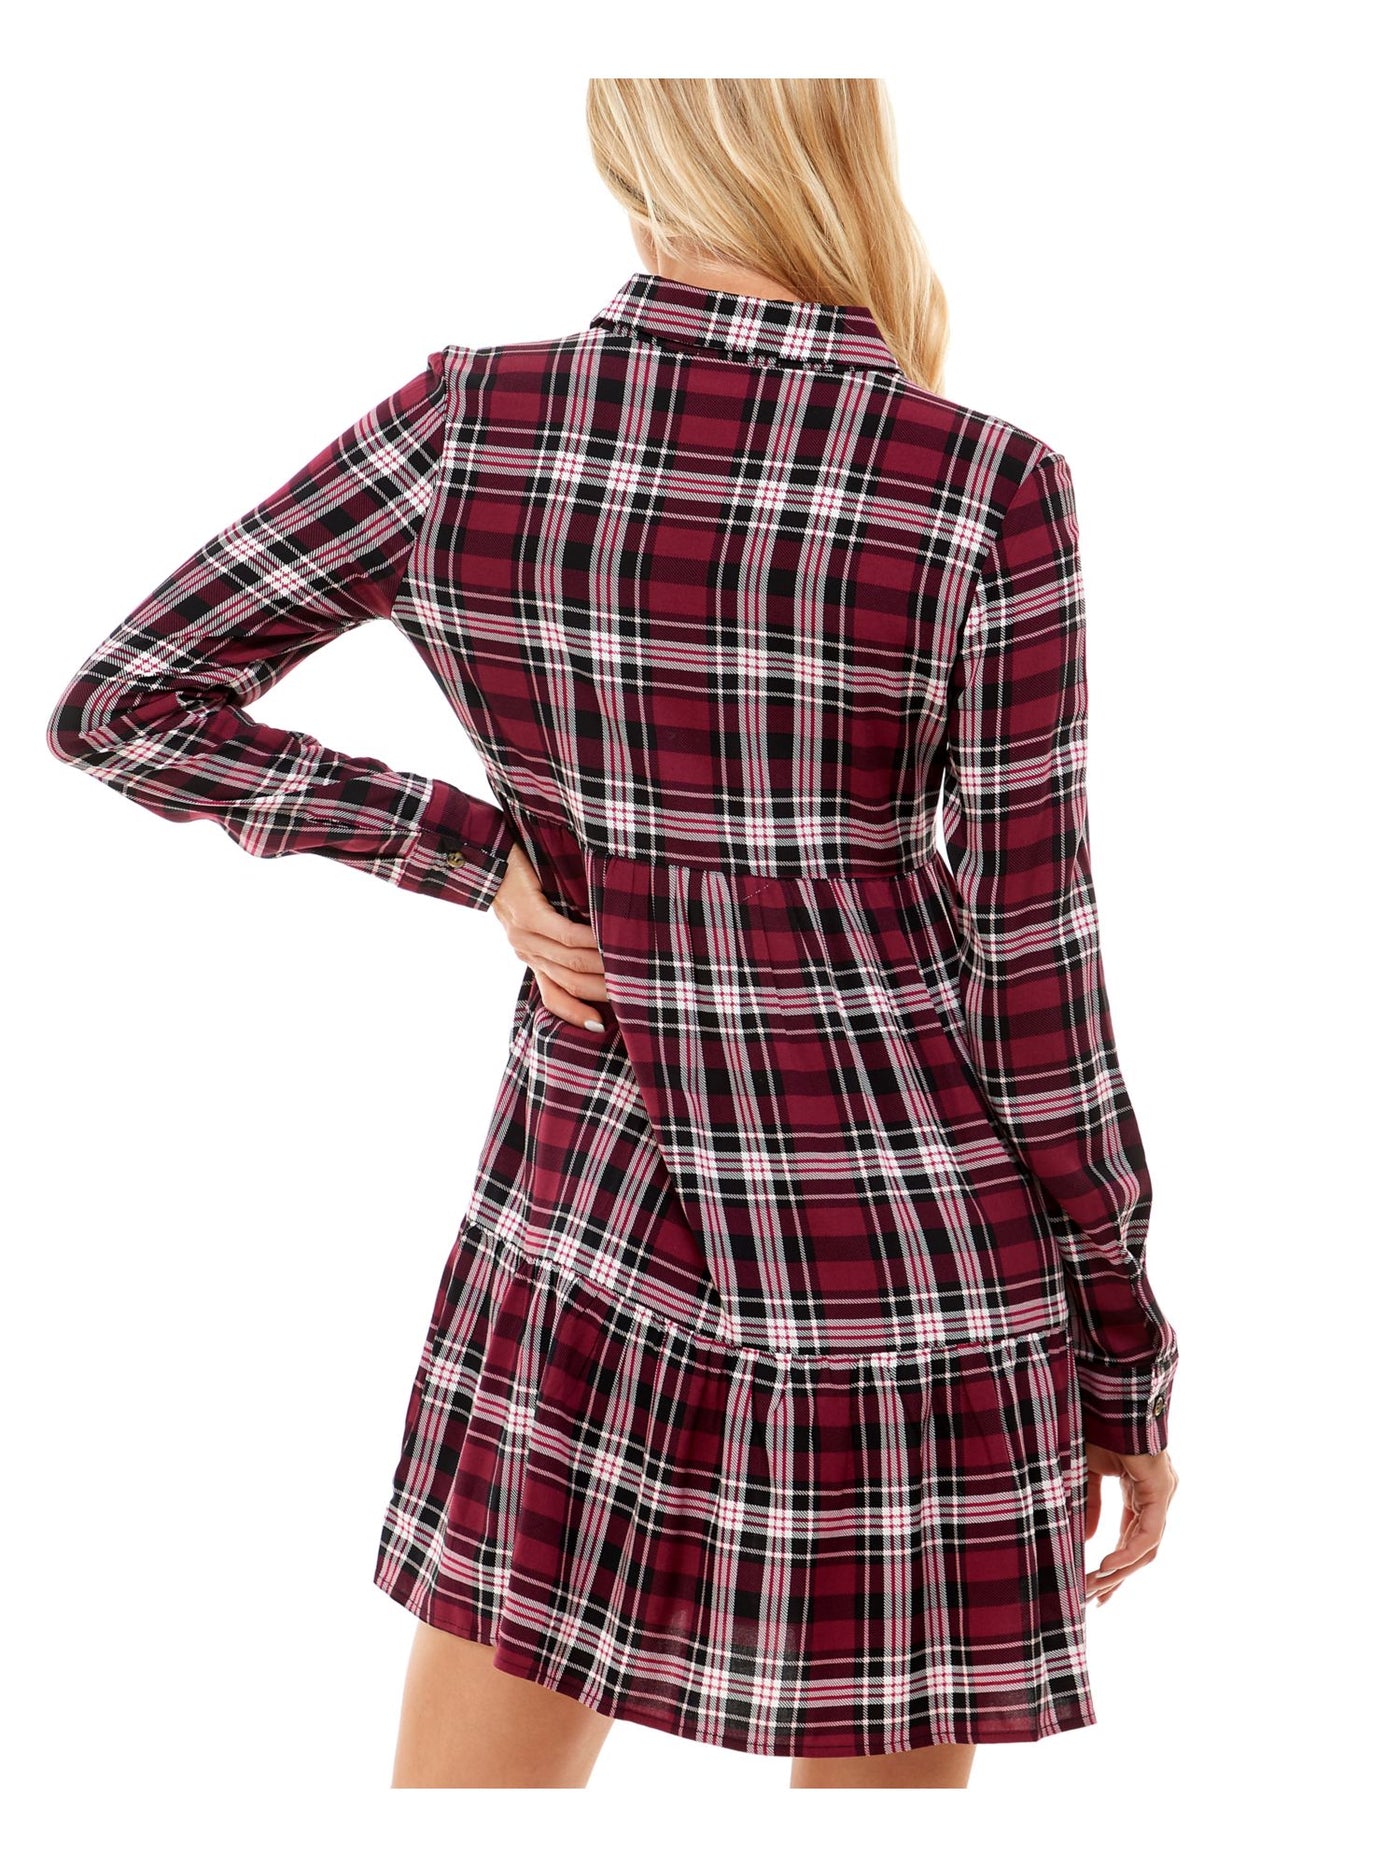 ULTRA FLIRT Womens Red Plaid Cuffed Sleeve Point Collar Above The Knee Wear To Work Fit + Flare Dress Juniors L